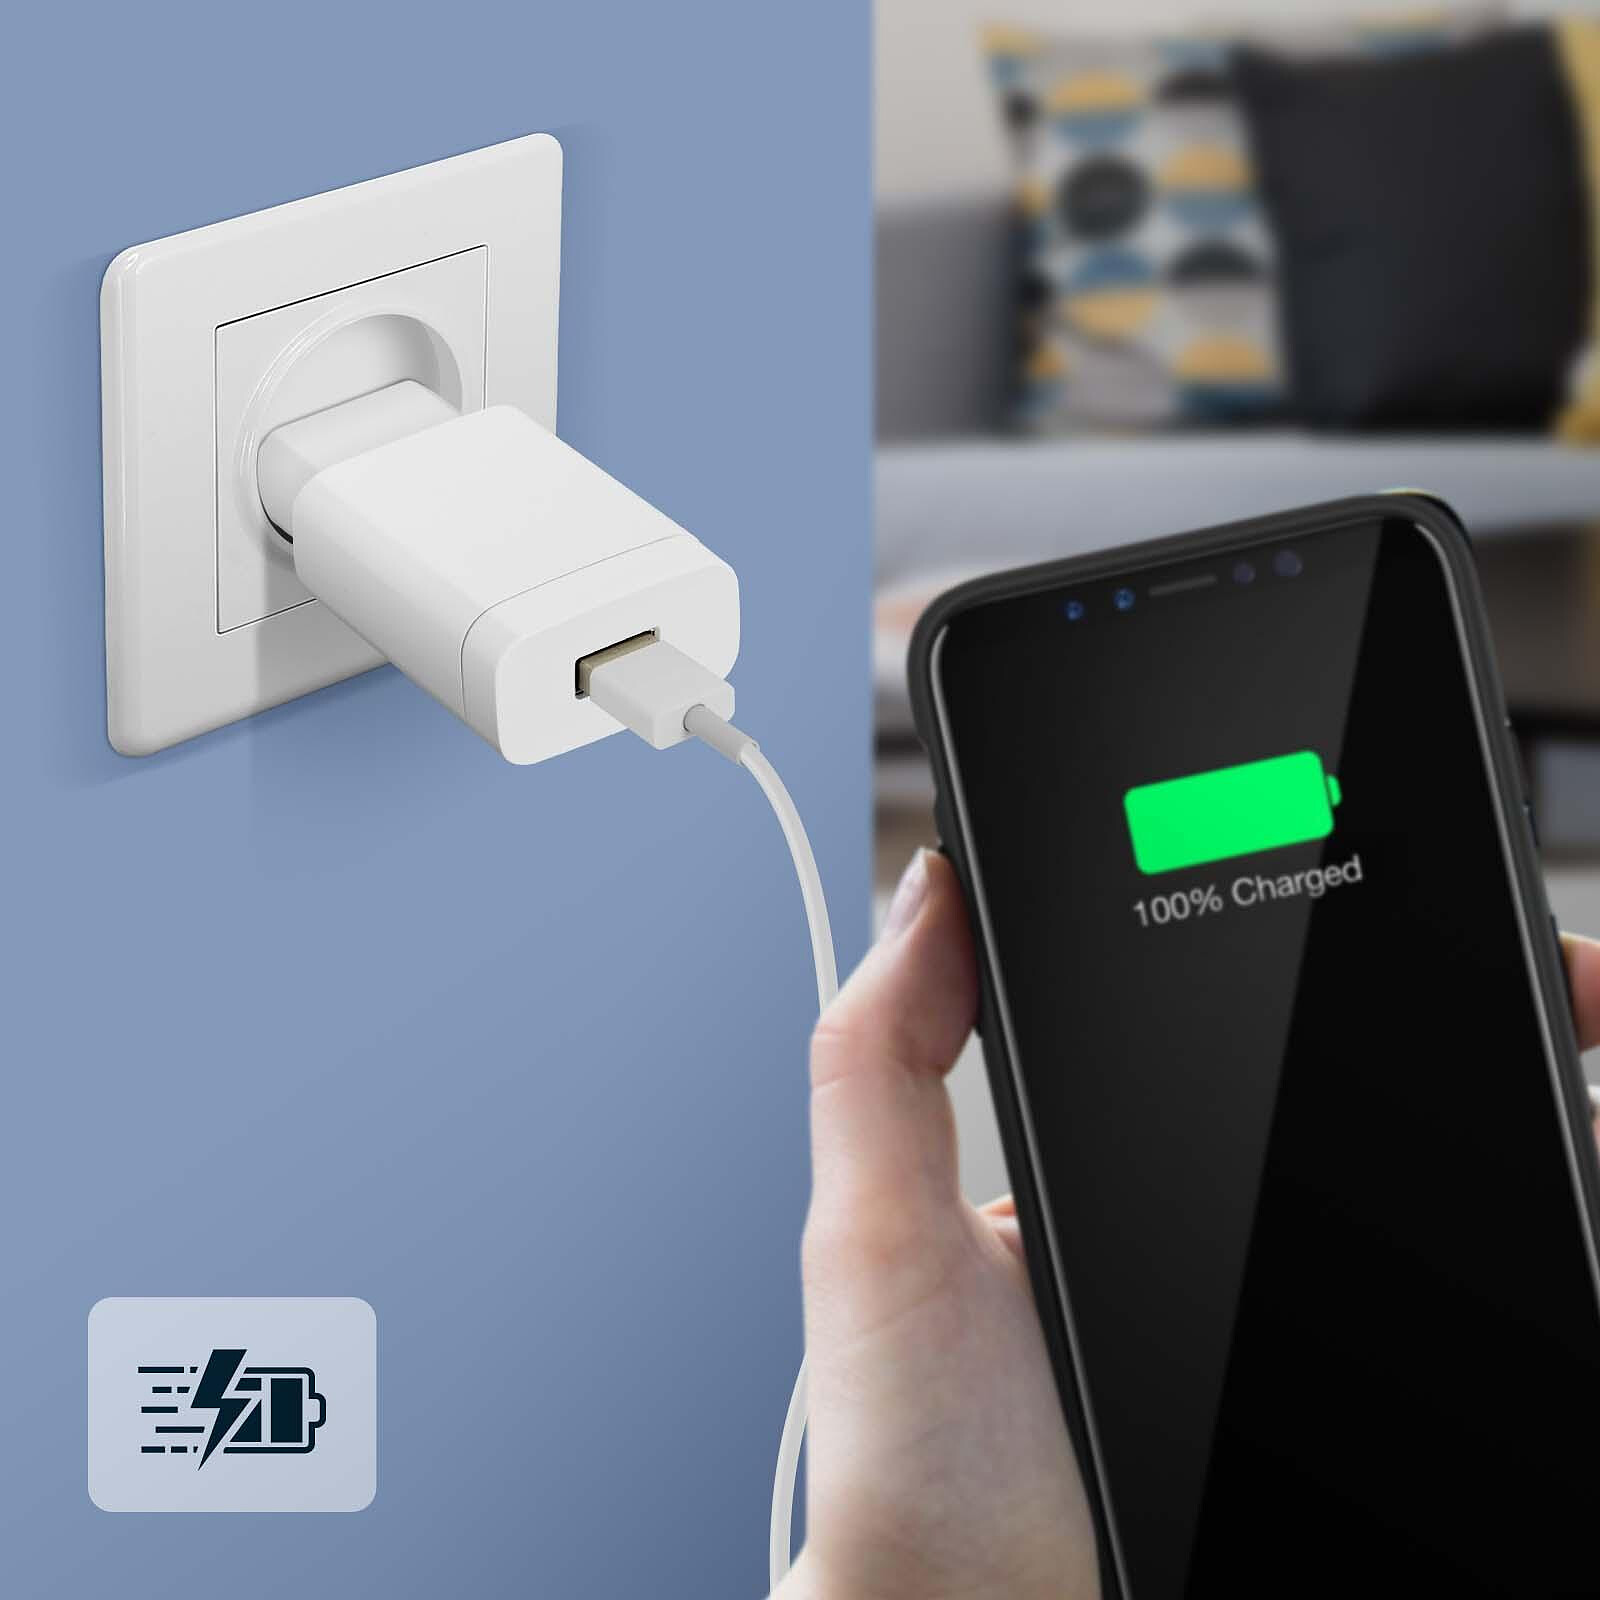 Chargeur 2A 15W Prise USB Charge Rapide Blanc